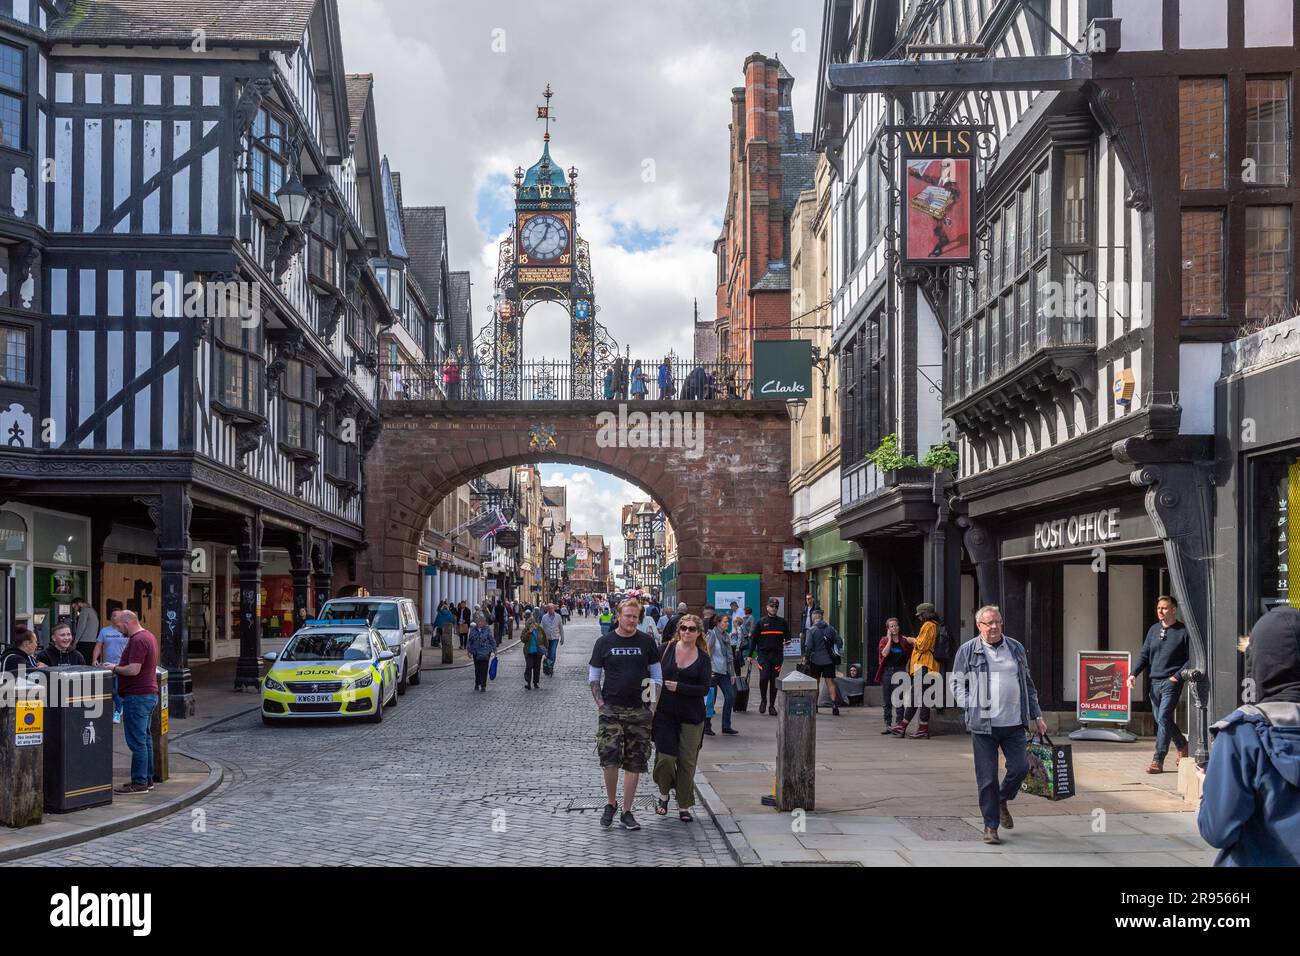 Eastgate Clock tower in the centre of Chester, Cheshire, UK Stock Photo